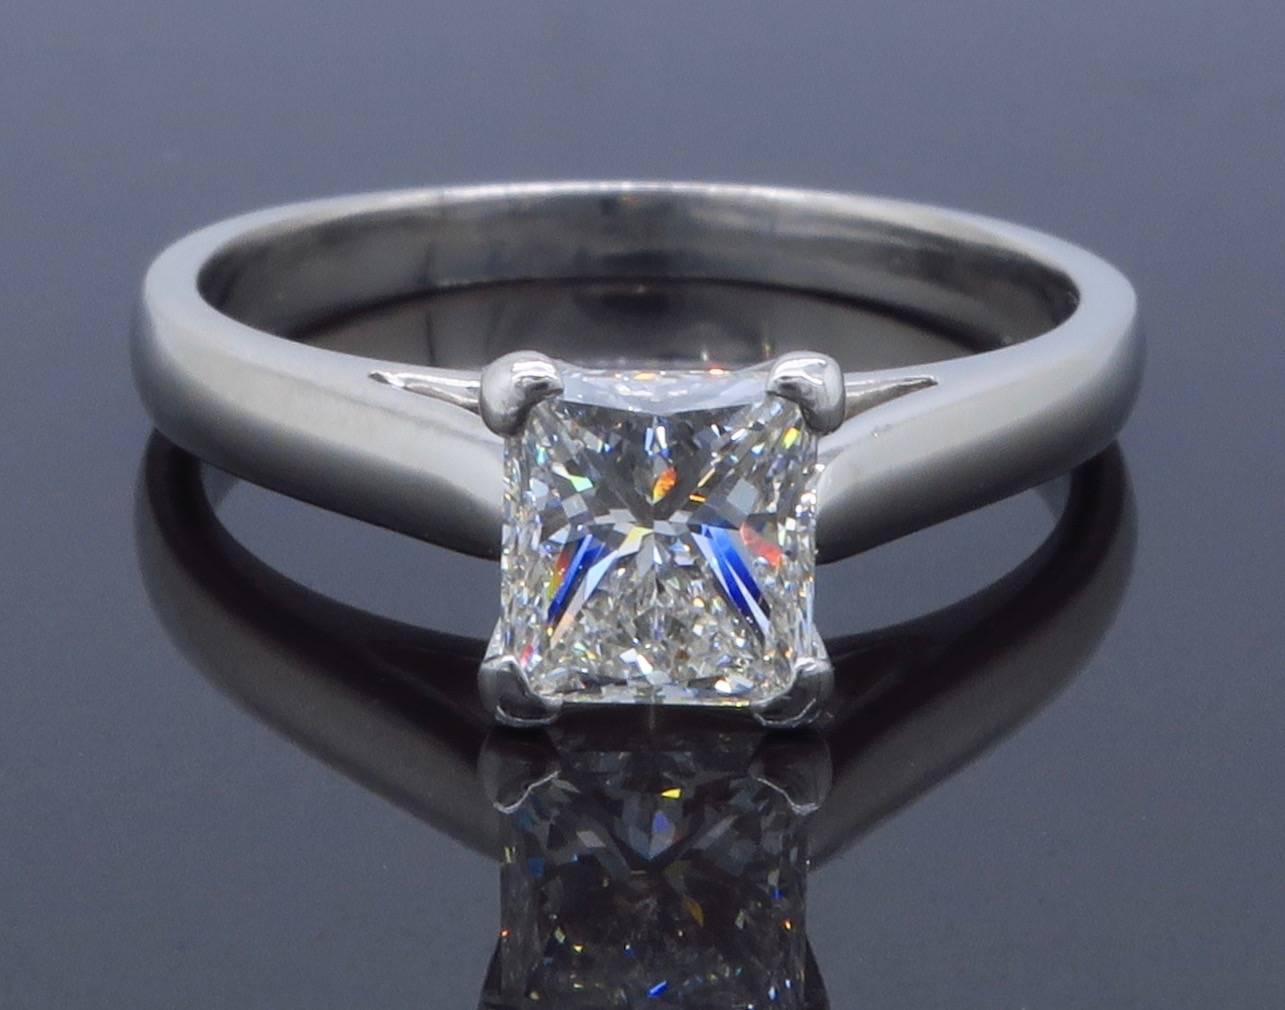 Platinum solitaire engagement ring features a GIA Certified 1.01CT Princess Cut Diamond with H color and VS2 clarity. The ring is currently a size 7 and weighs 5.1 grams.